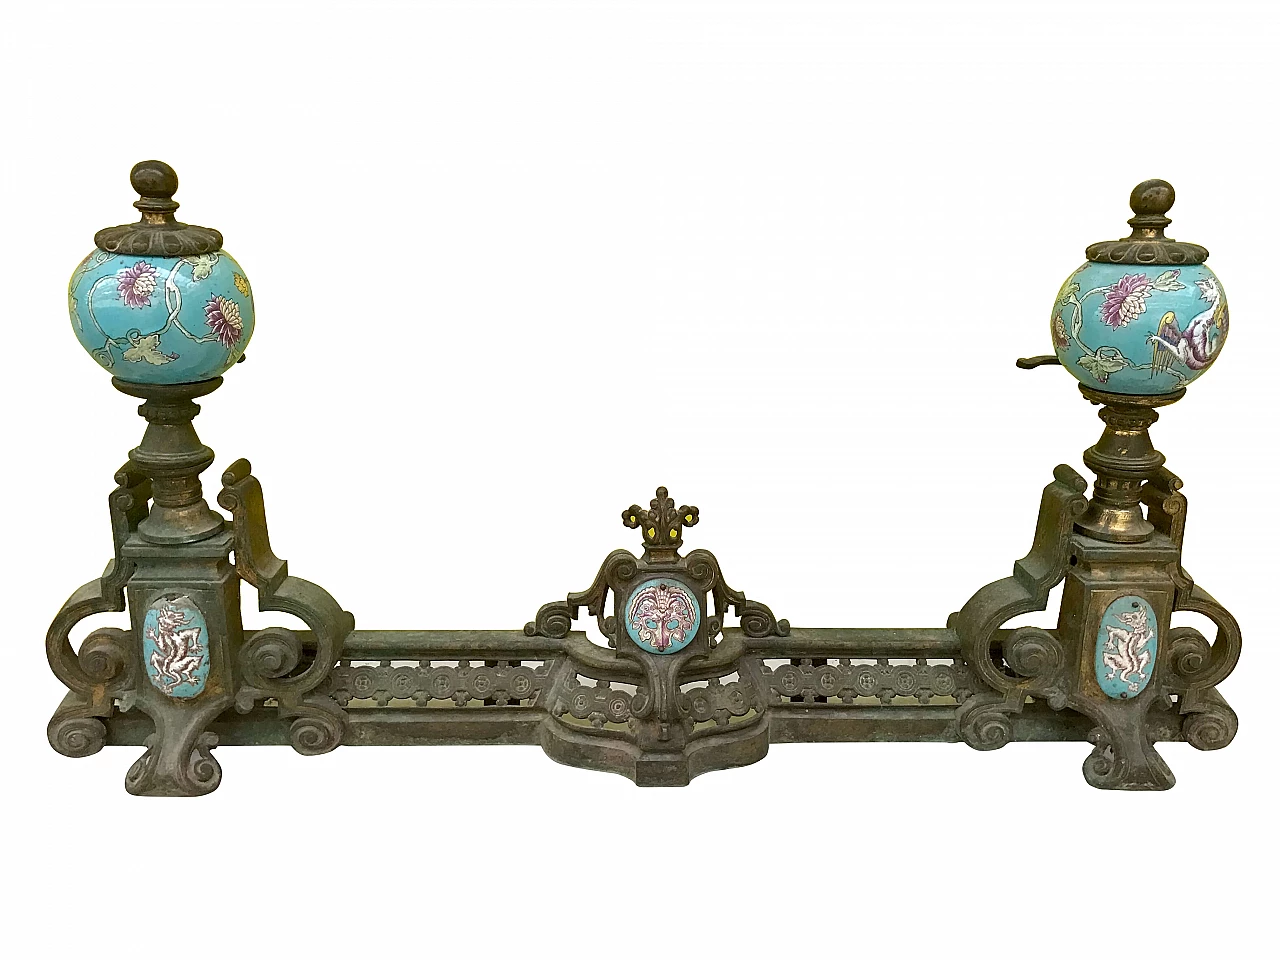 Frontal ash guard for fireplace in gilded bronze with painted glazed ceramic globes and plaques, 19th century 1169104